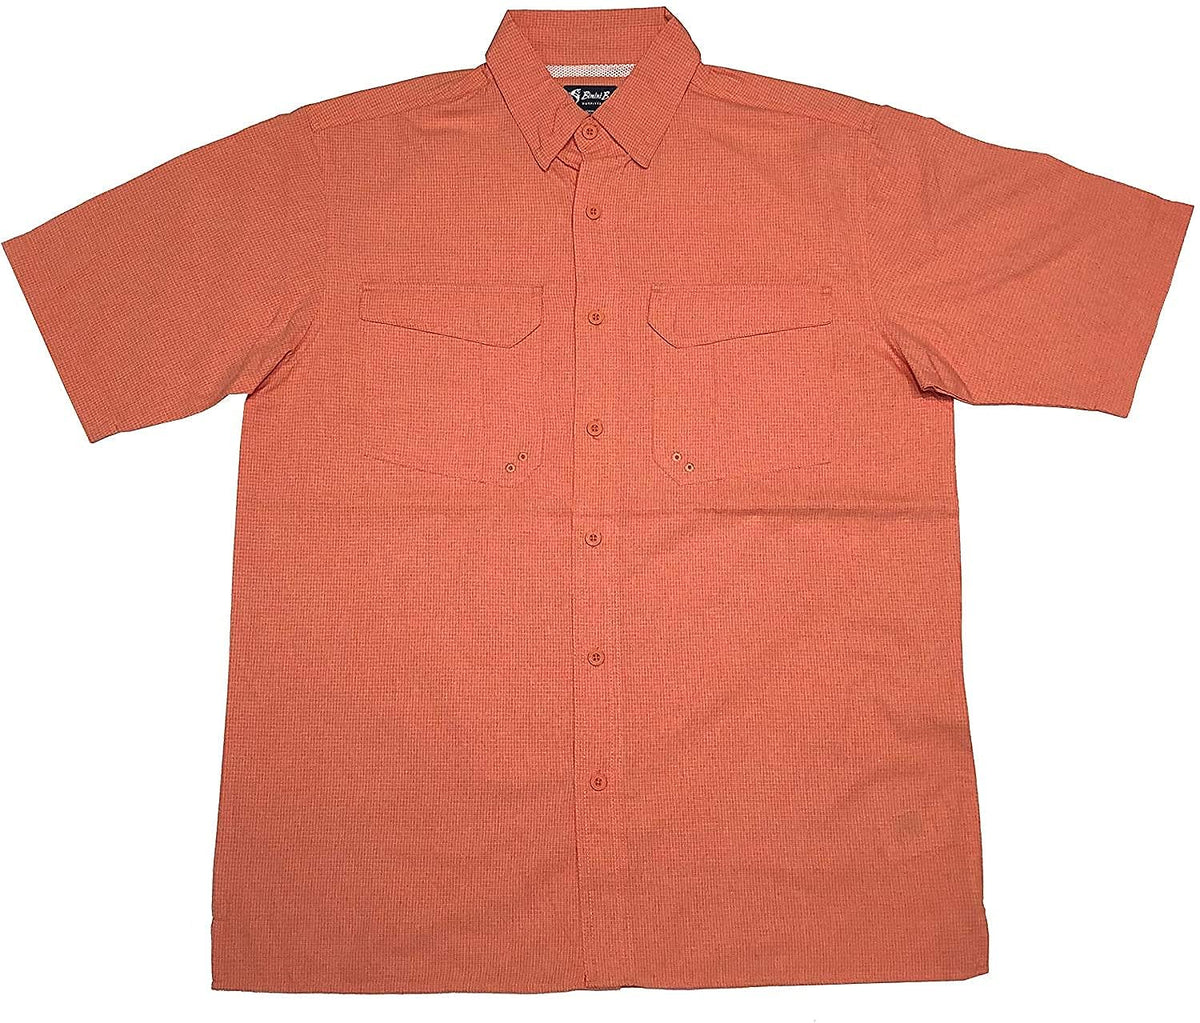 Bimini Bay Outfitters The Largo Short Sleeve Shirt with Blood Guard